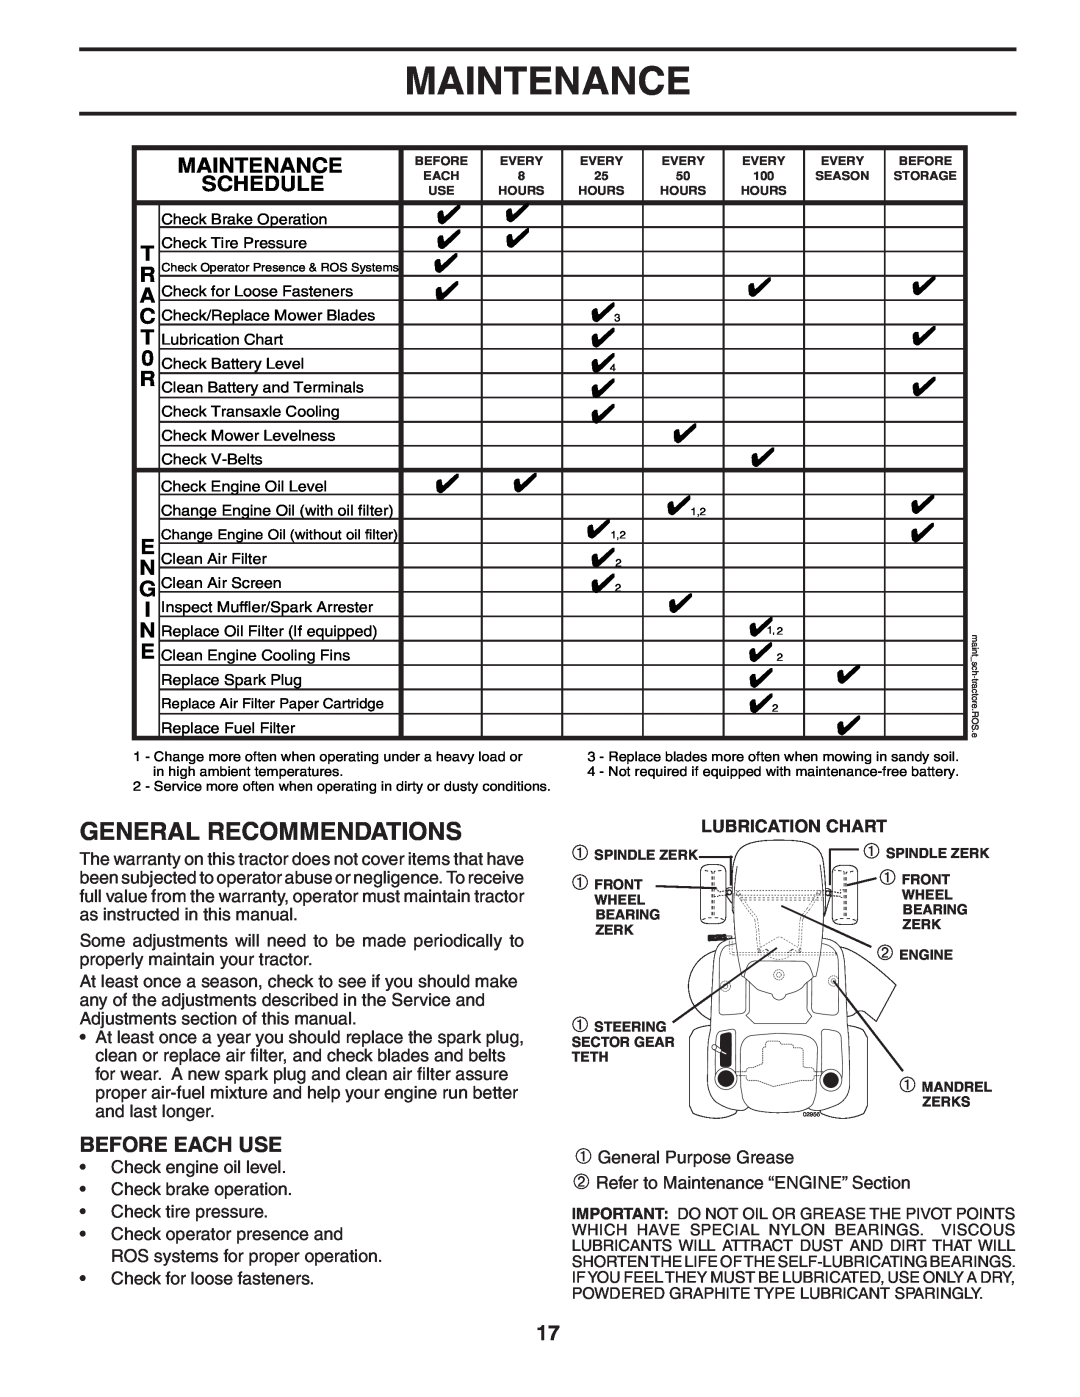 Poulan PBGT22H48 manual Maintenance, General Recommendations, Schedule, Before Each Use 